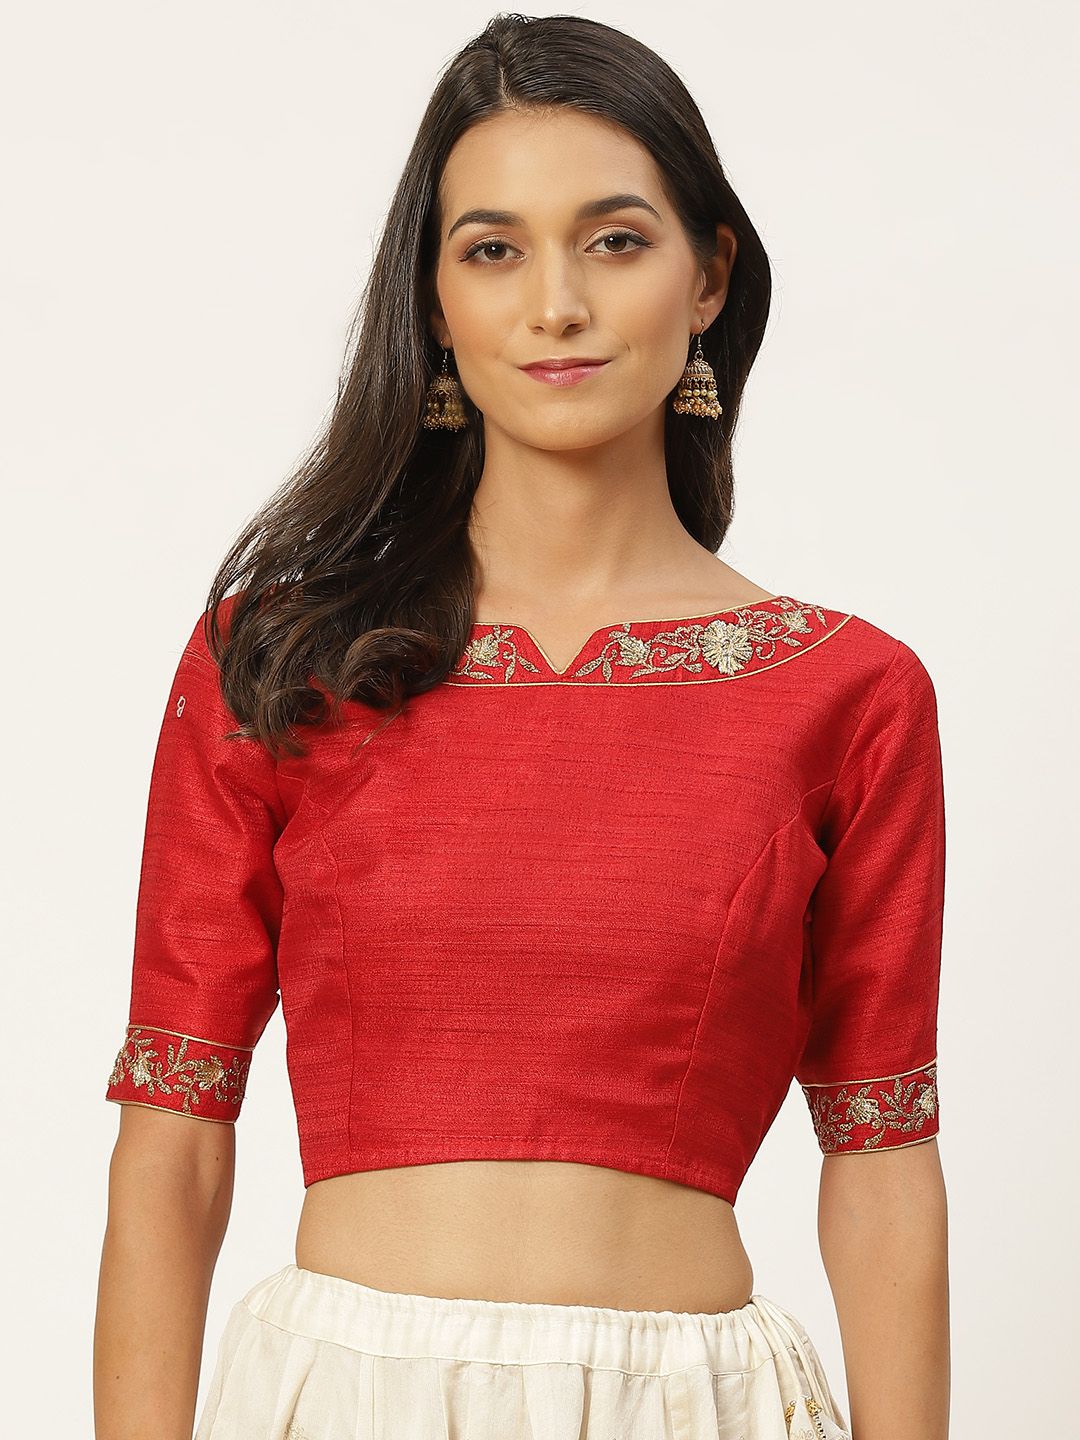 Studio Shringaar Women Red & Golden Solid Stitched Saree Blouse With Embroidered Detail Price in India